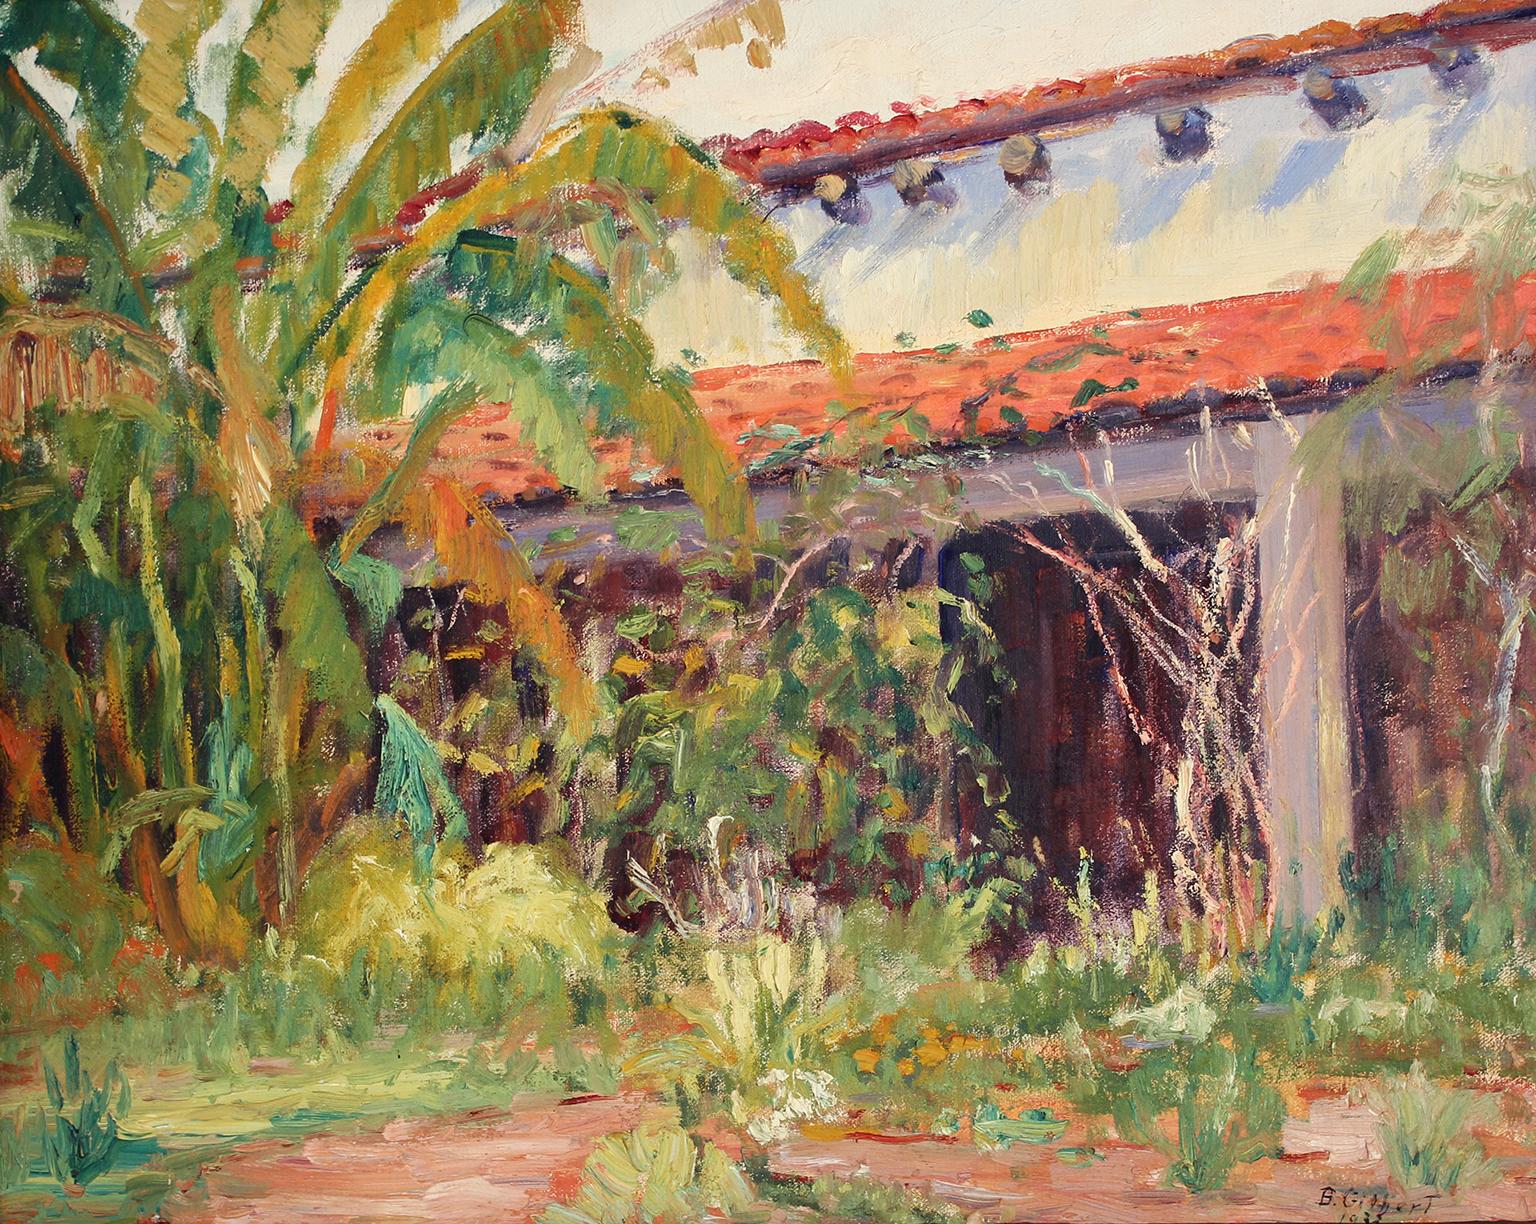 Beautiful plein air painting by listed San Diego impressionist artist Bess Gilbert. Dated 1933 and is of an old adobe building, probably in Old Town San Diego or Balboa Park. Very extensive bio online about the artist and her rich San Diego history.